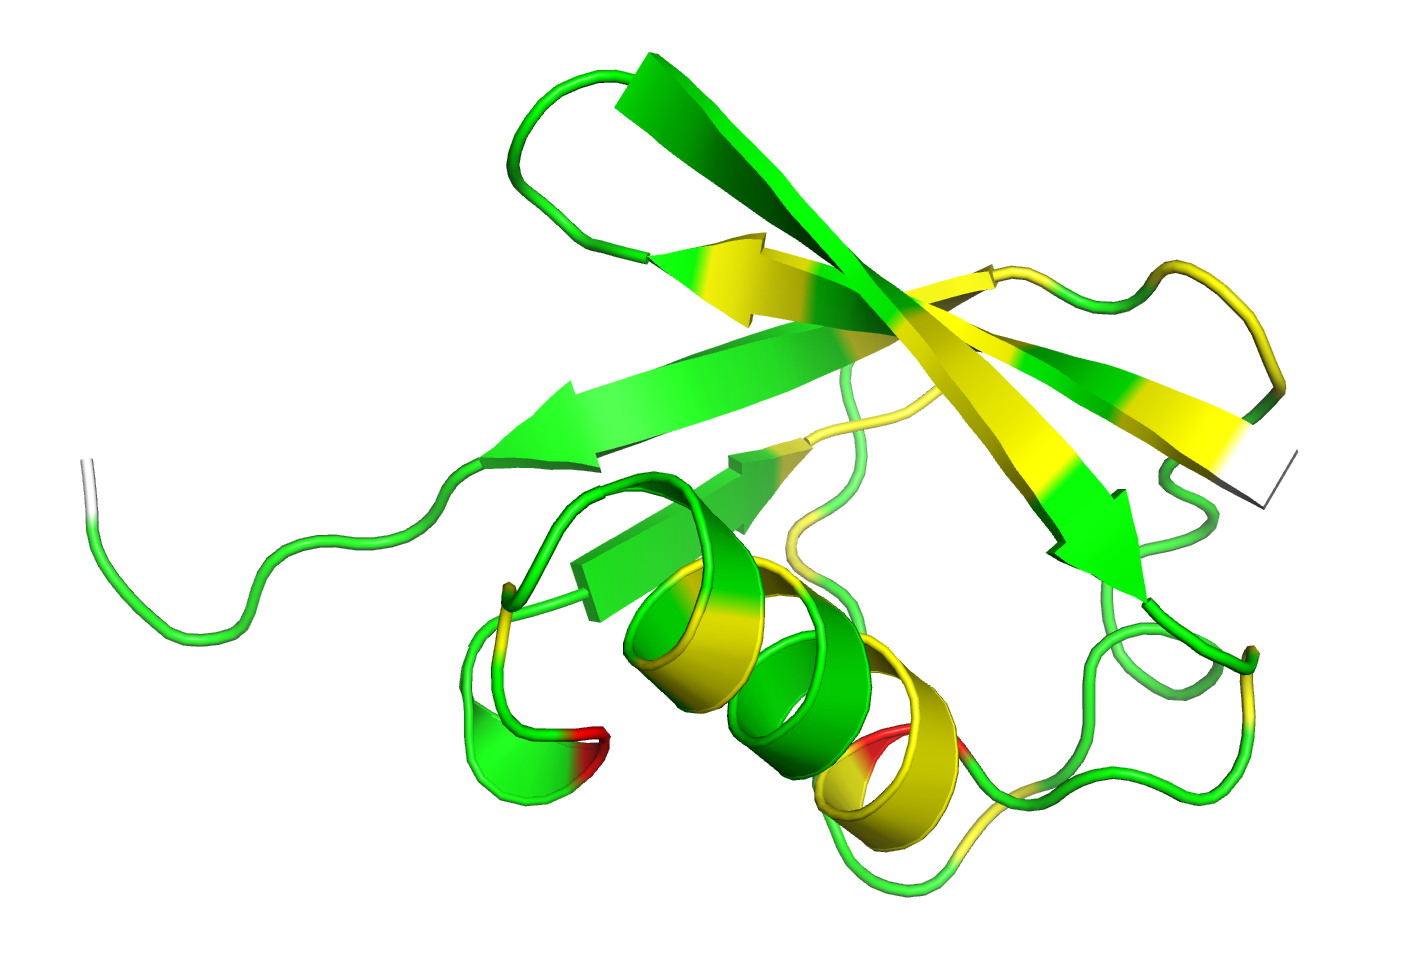 Ubiquitin (protein) PDB id: 1D3Z | Visual validation with <a  class='active_link_w' href='https://pymolwiki.org/index.php/Cheshift' target='_blank'>Cheshift PyMOL plugin</a>